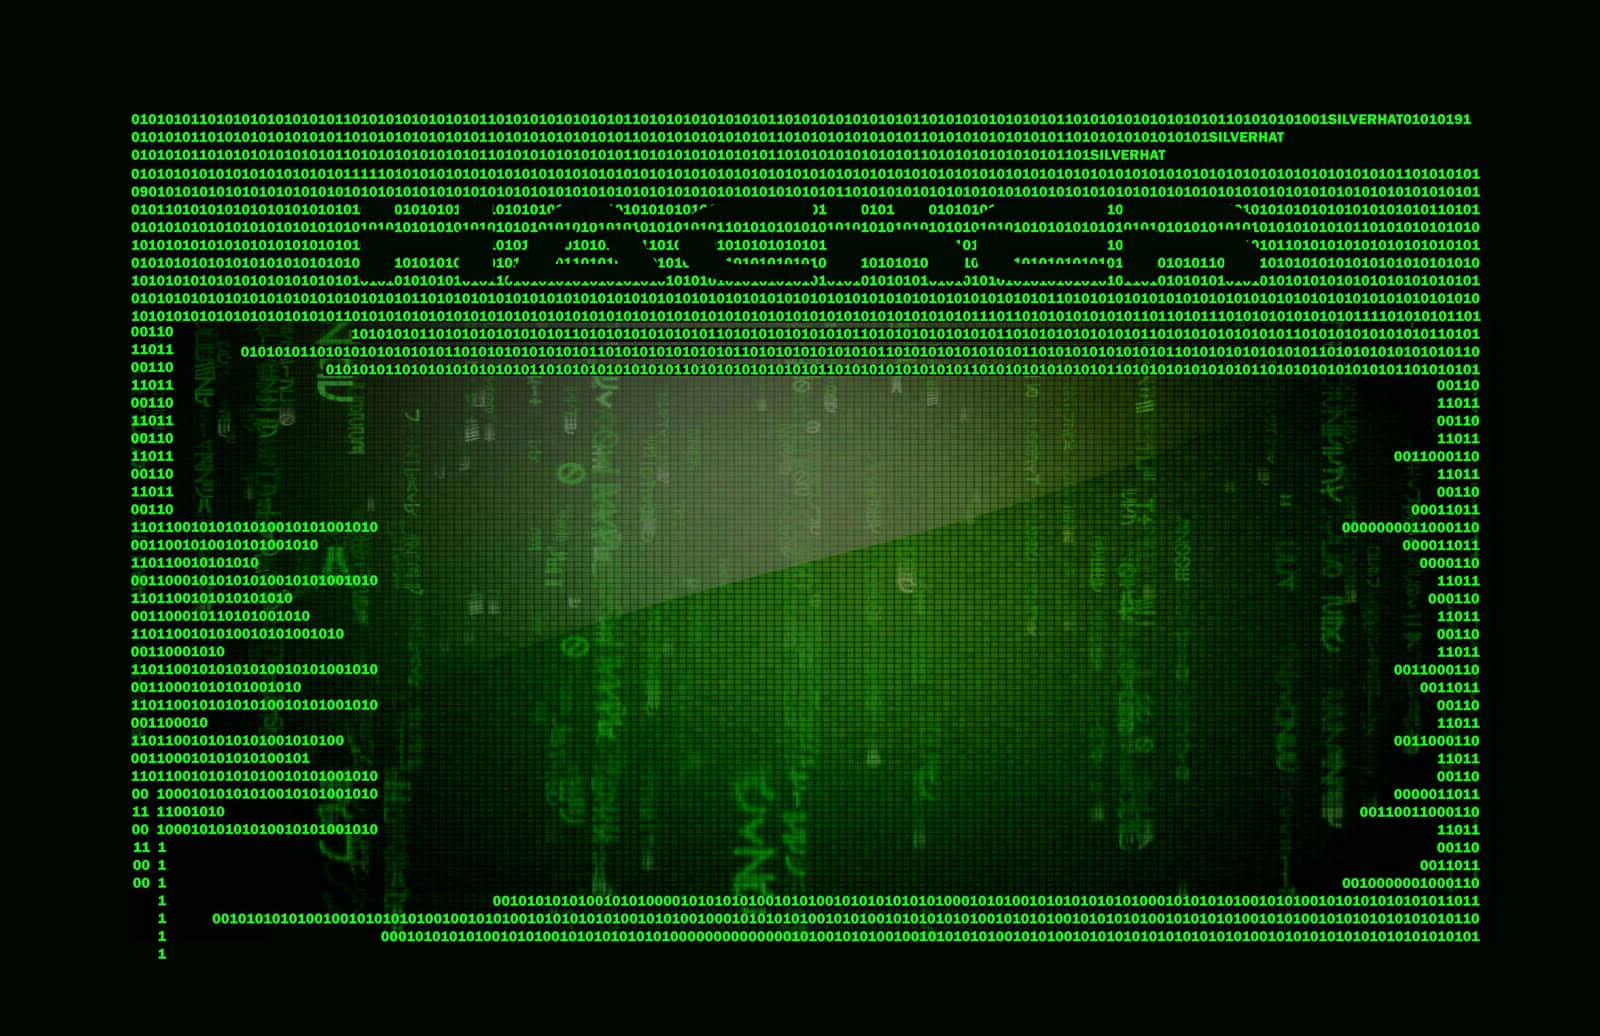 "The power of hacking"